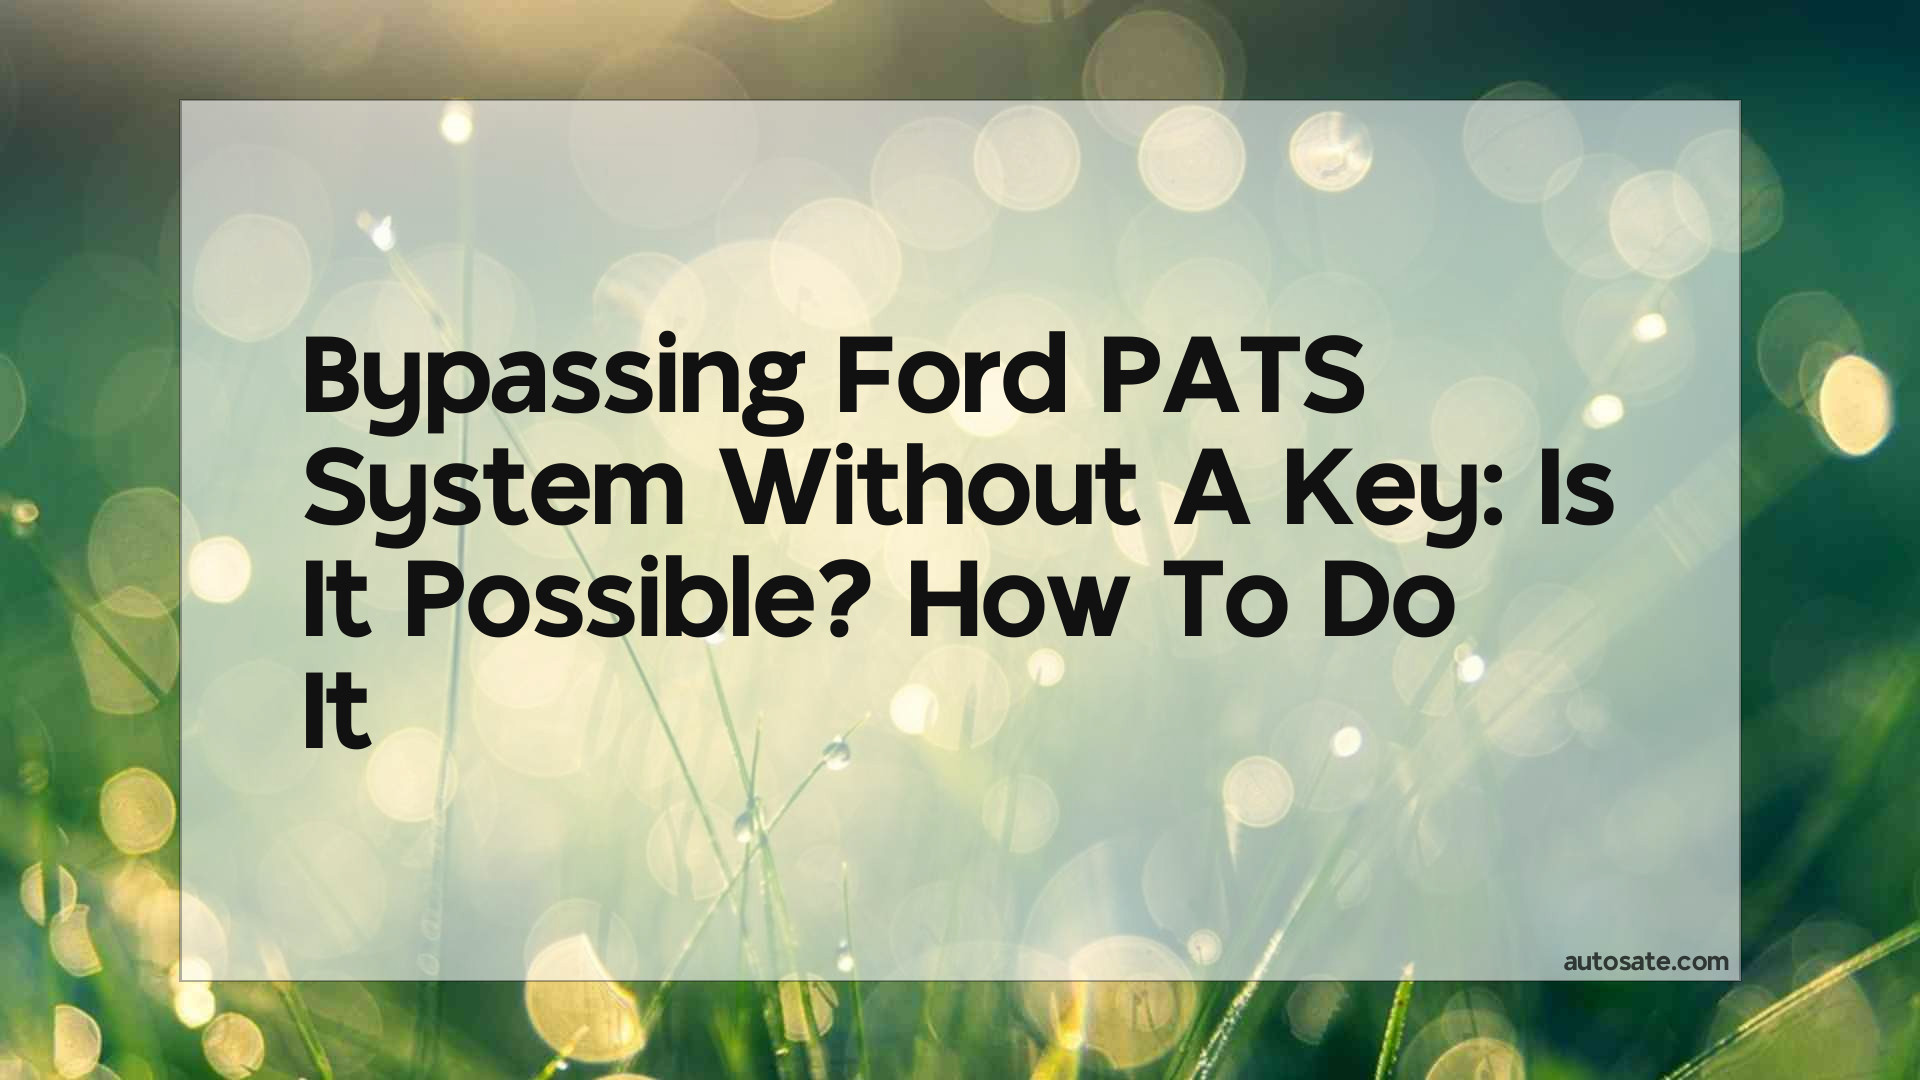 Bypassing Ford Pats System Without A Key: Is It Possible? How To Do It